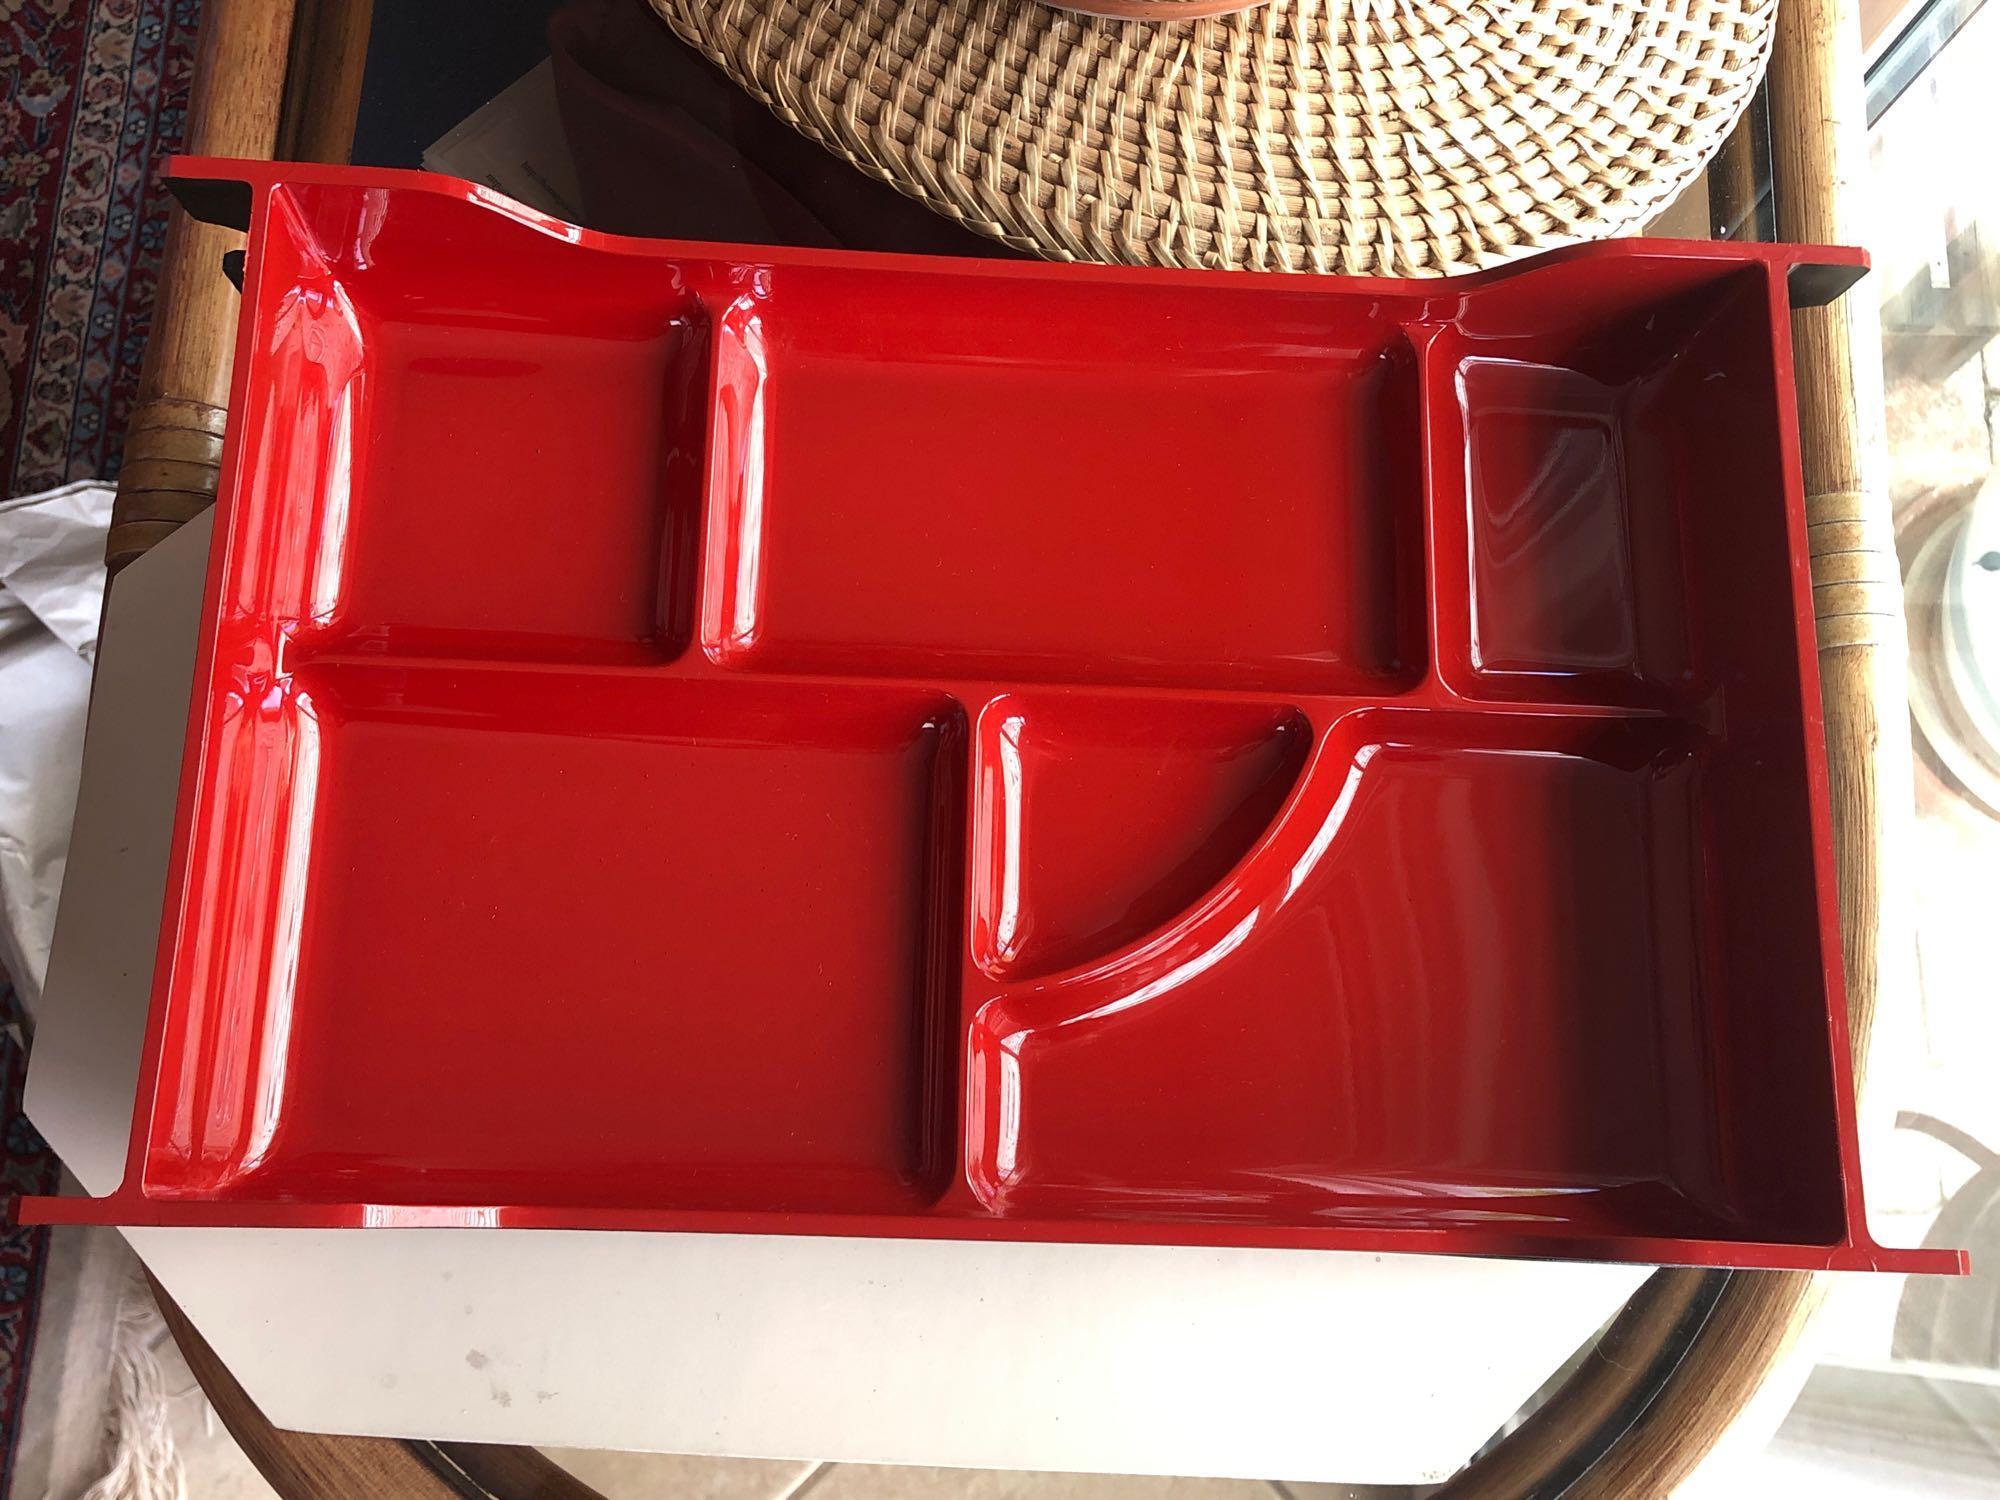 Japanese Lacquer Dining Trays 5 Piece Set